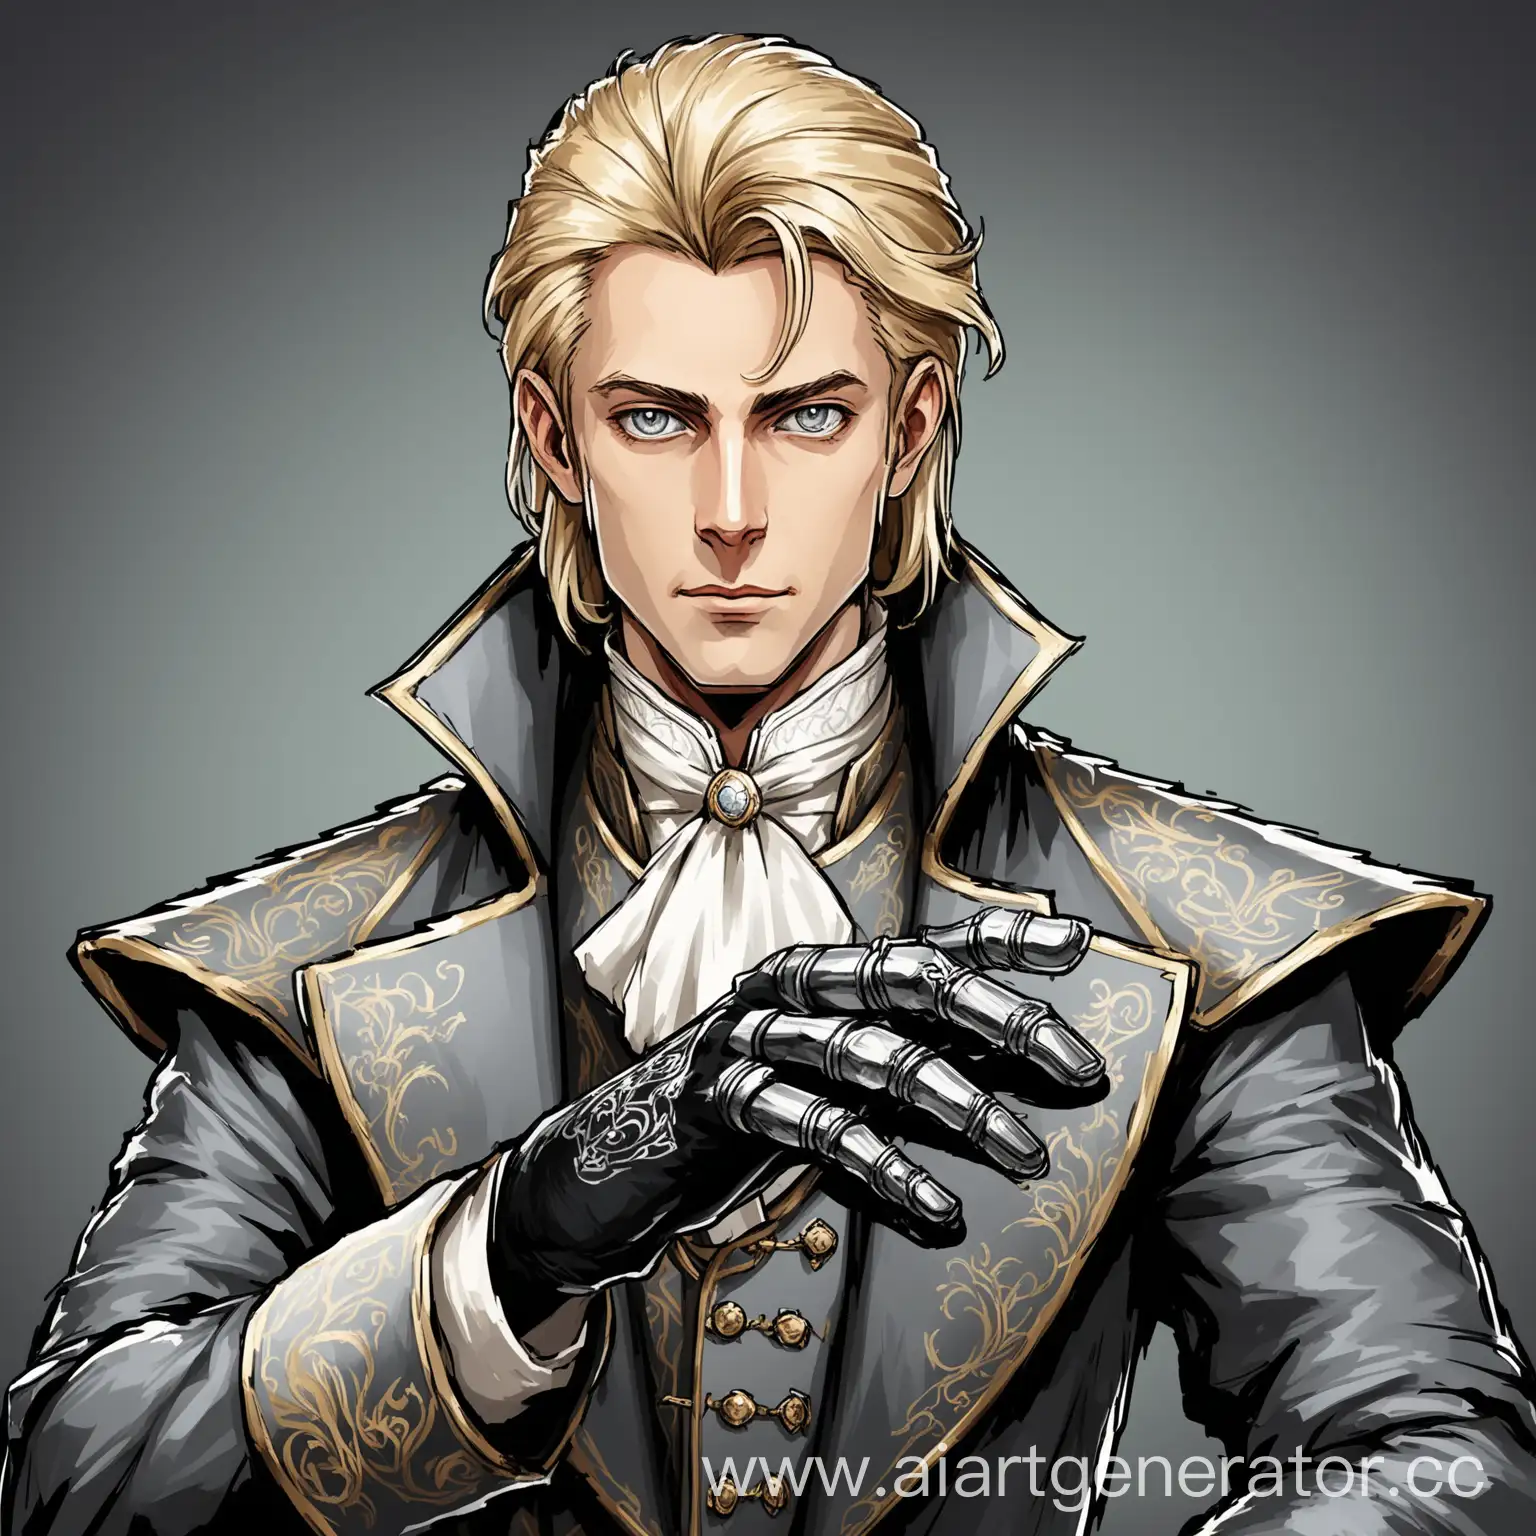 Make a portrait of an aristocrat with a metal hand on his right hand. He looks 30 years old. He is also drawn, but as if in the style of an avatar from D&D and beautifully. Also add black gloves. Make a few more hand gestures. He's wearing a coat. He has big gray eyes, blond hair and a hairstyle to the right